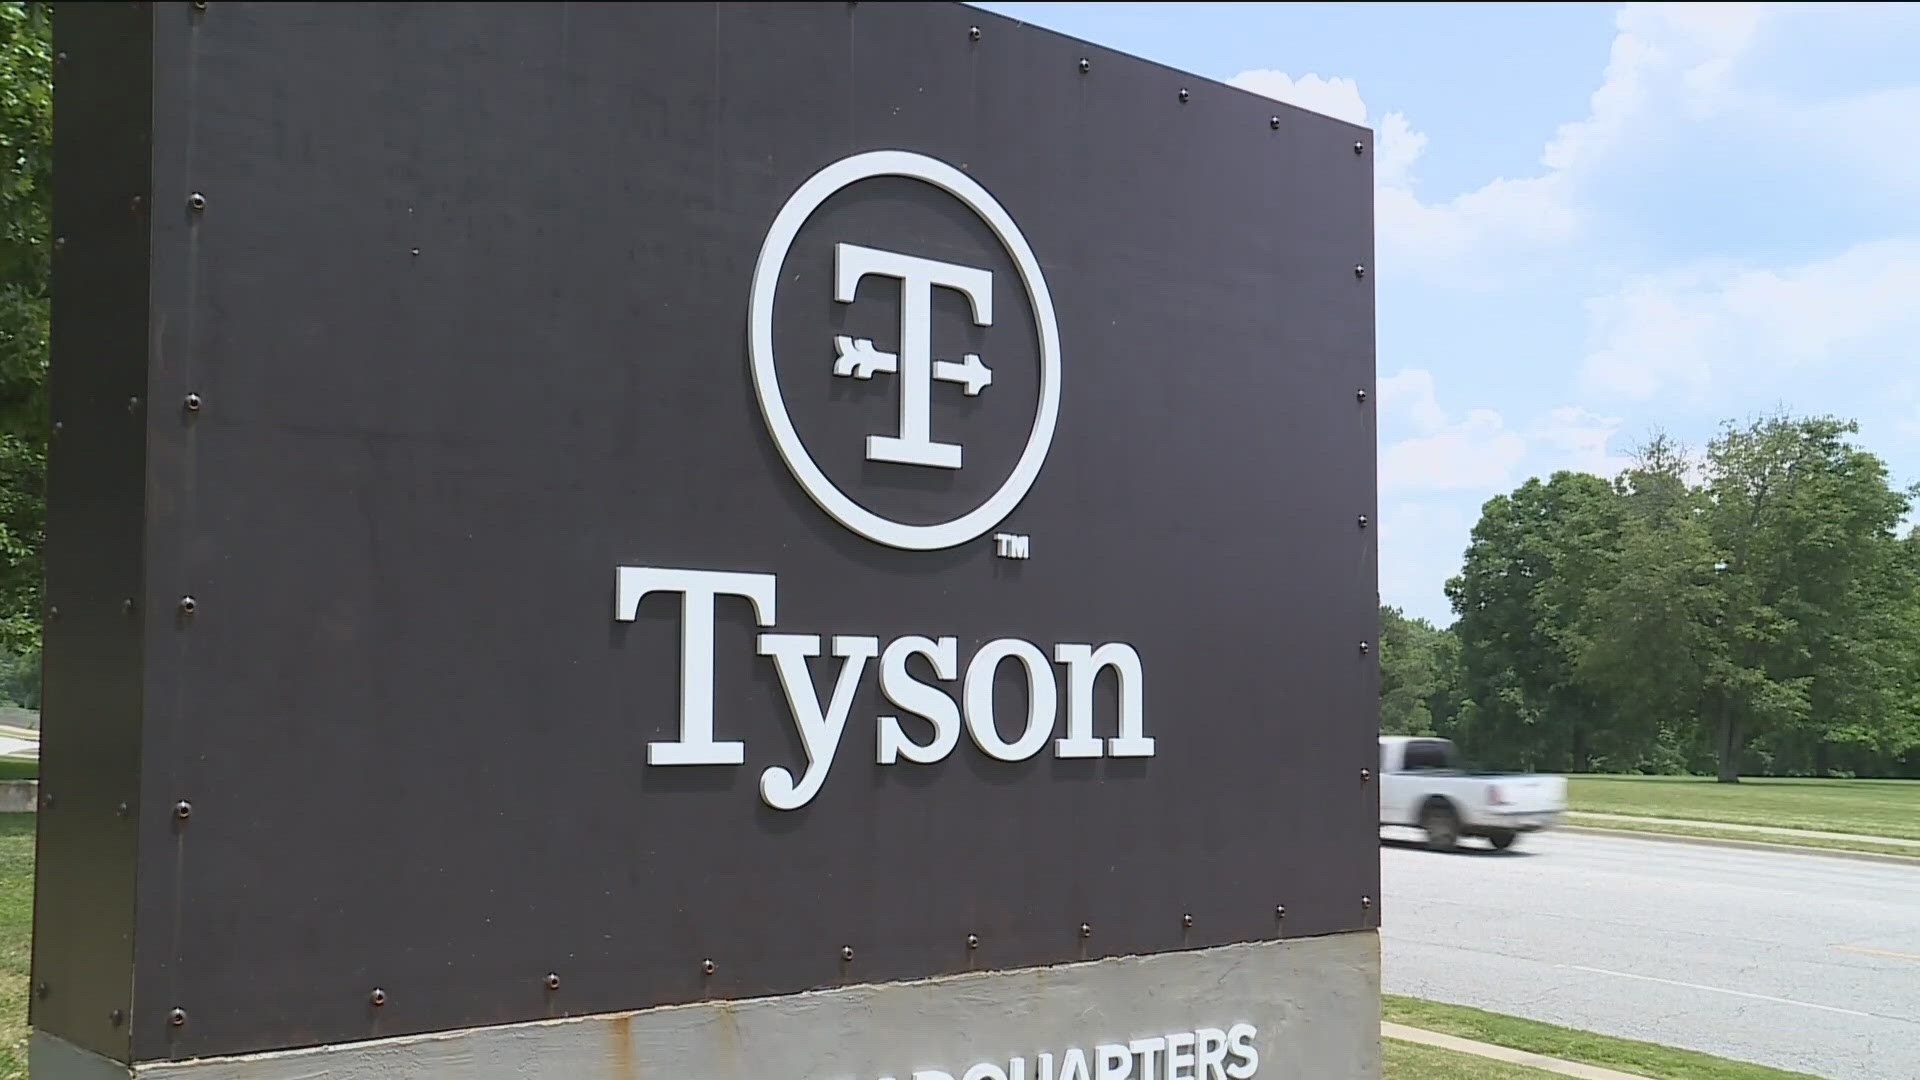 A report found that Tyson Foods Inc. dumped millions of pounds of pollutants into U.S. waterways.